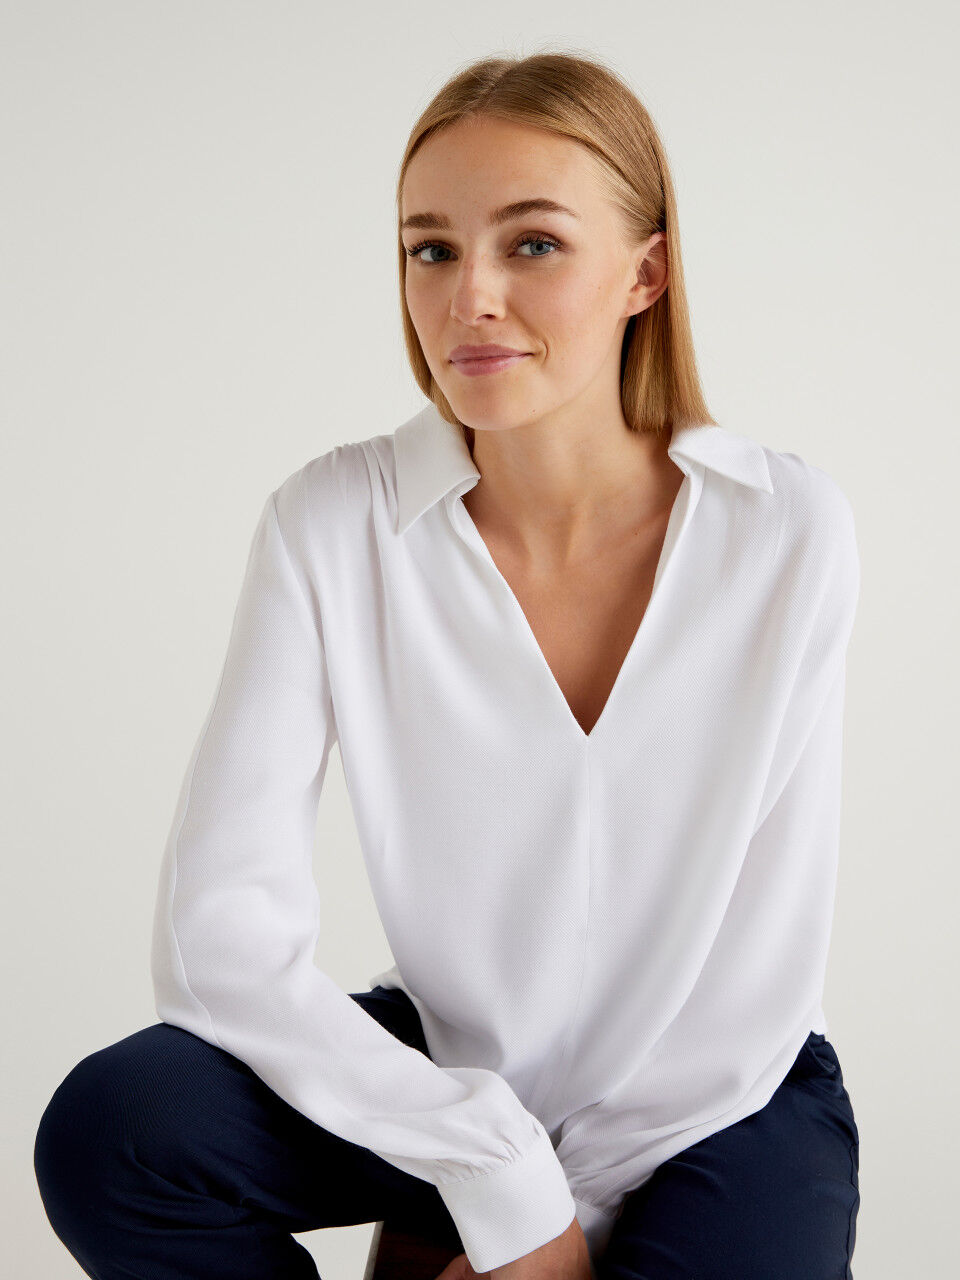 Women's Shirts and Blouses New Collection 2022 | Benetton